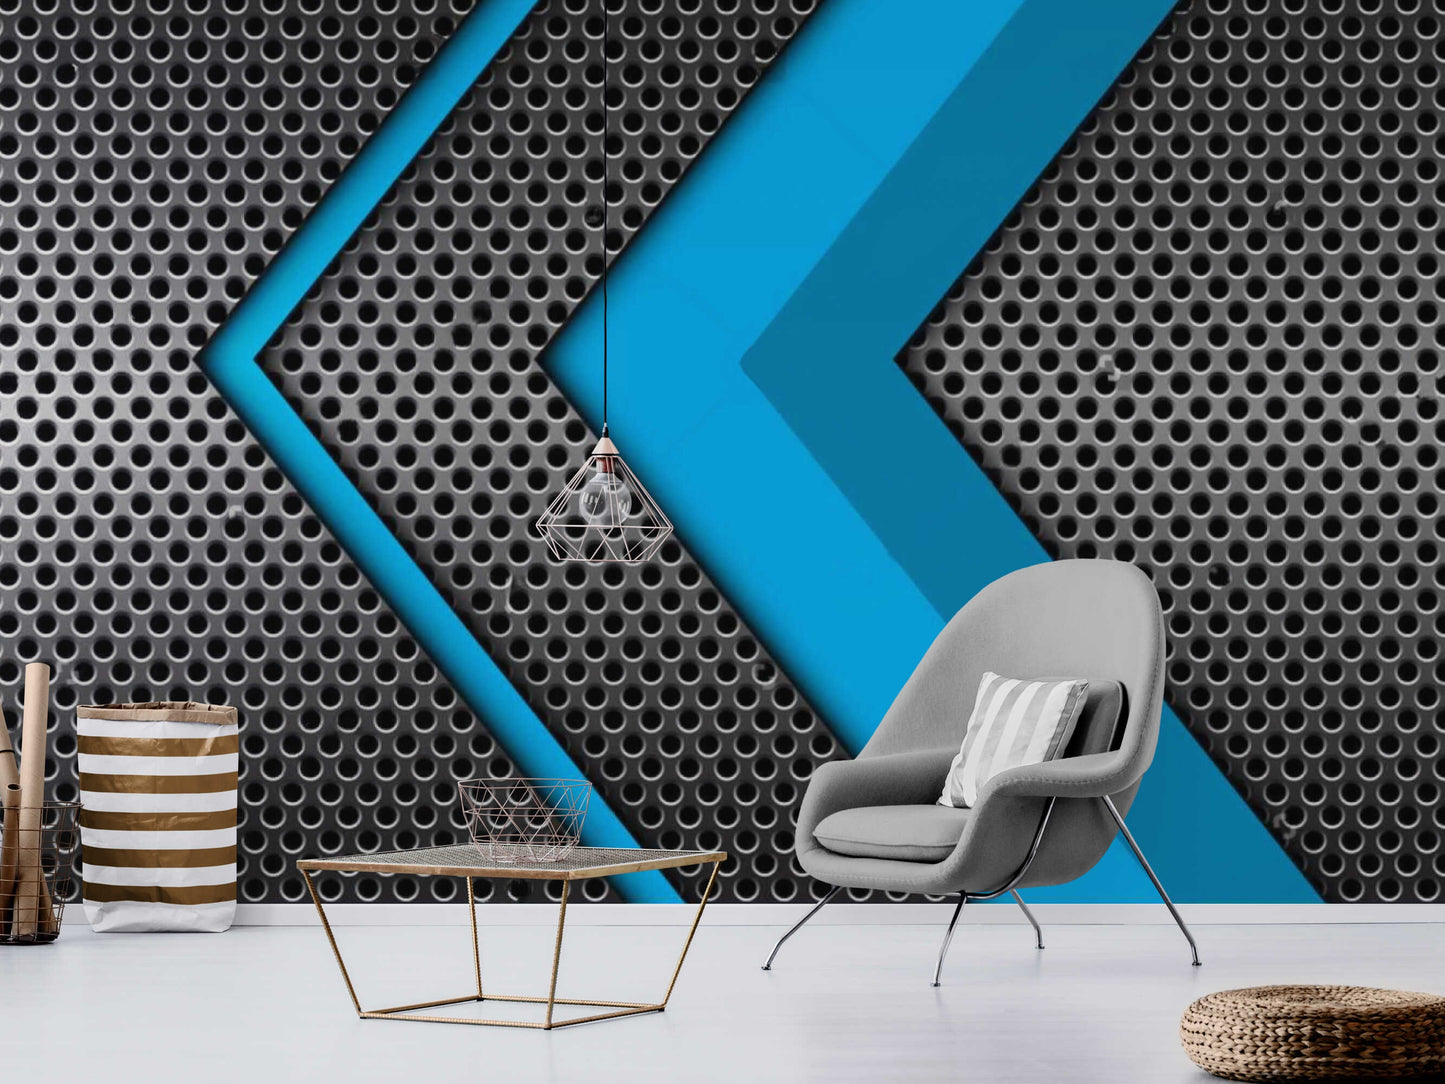 Silver perforated metal wallpaper with a blue accent wall design, creating an industrial-chic ambiance.